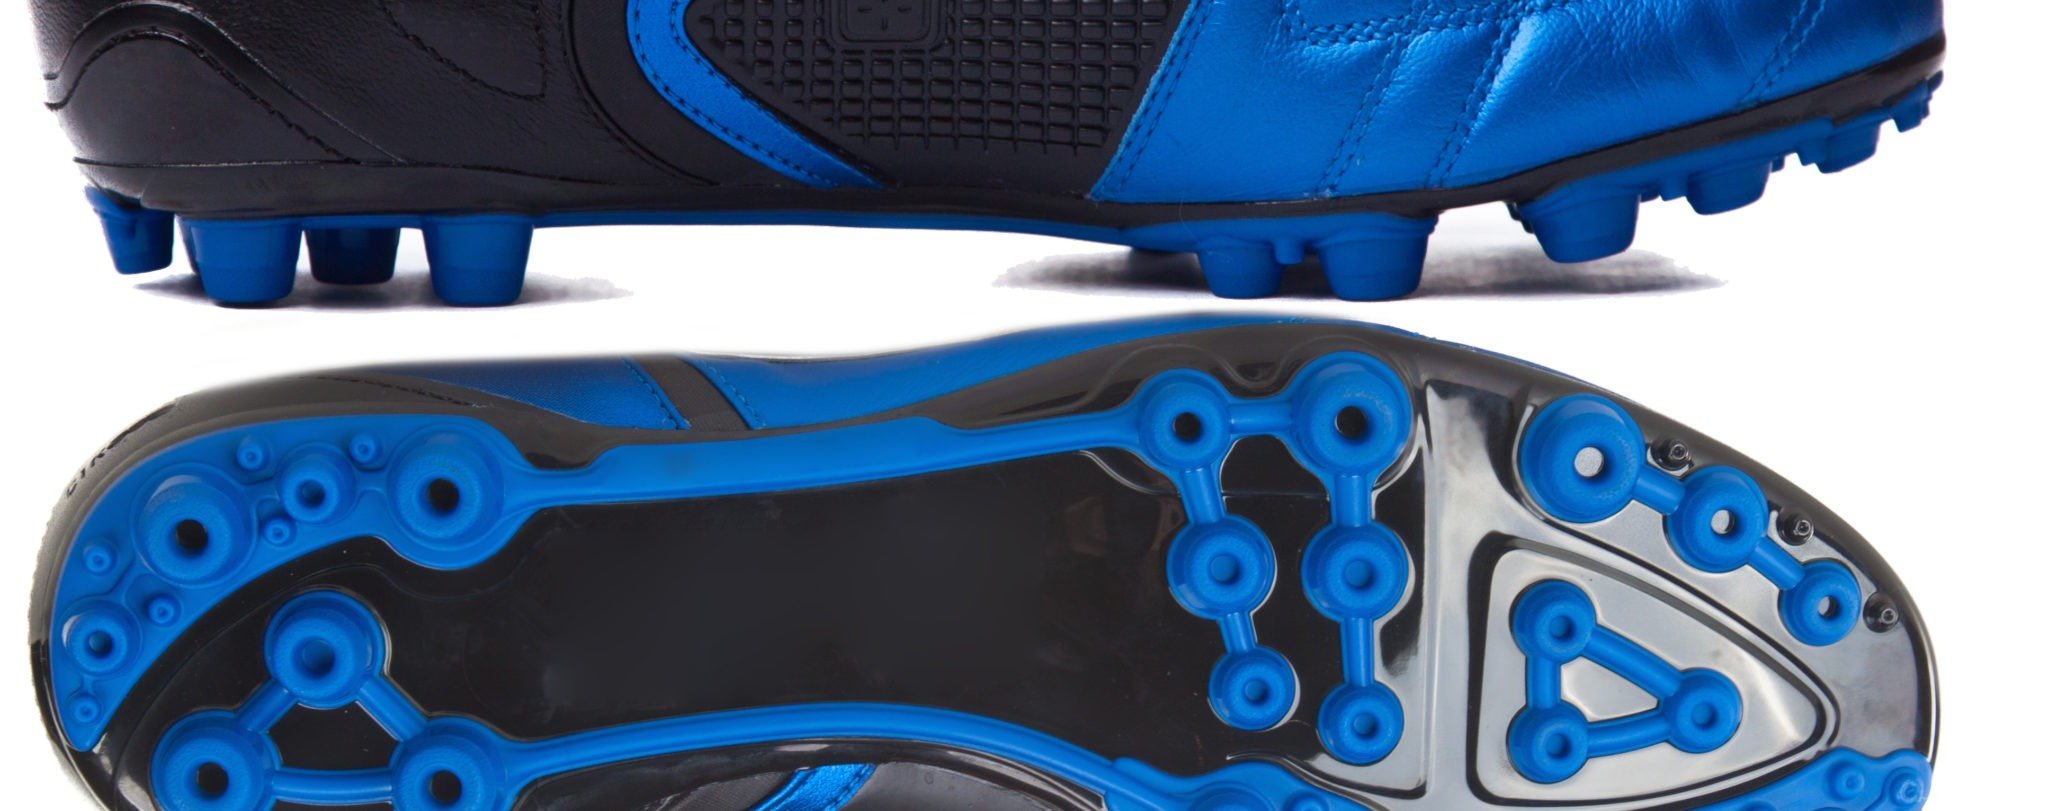 Soccer Cleat Injection Molded Outsole